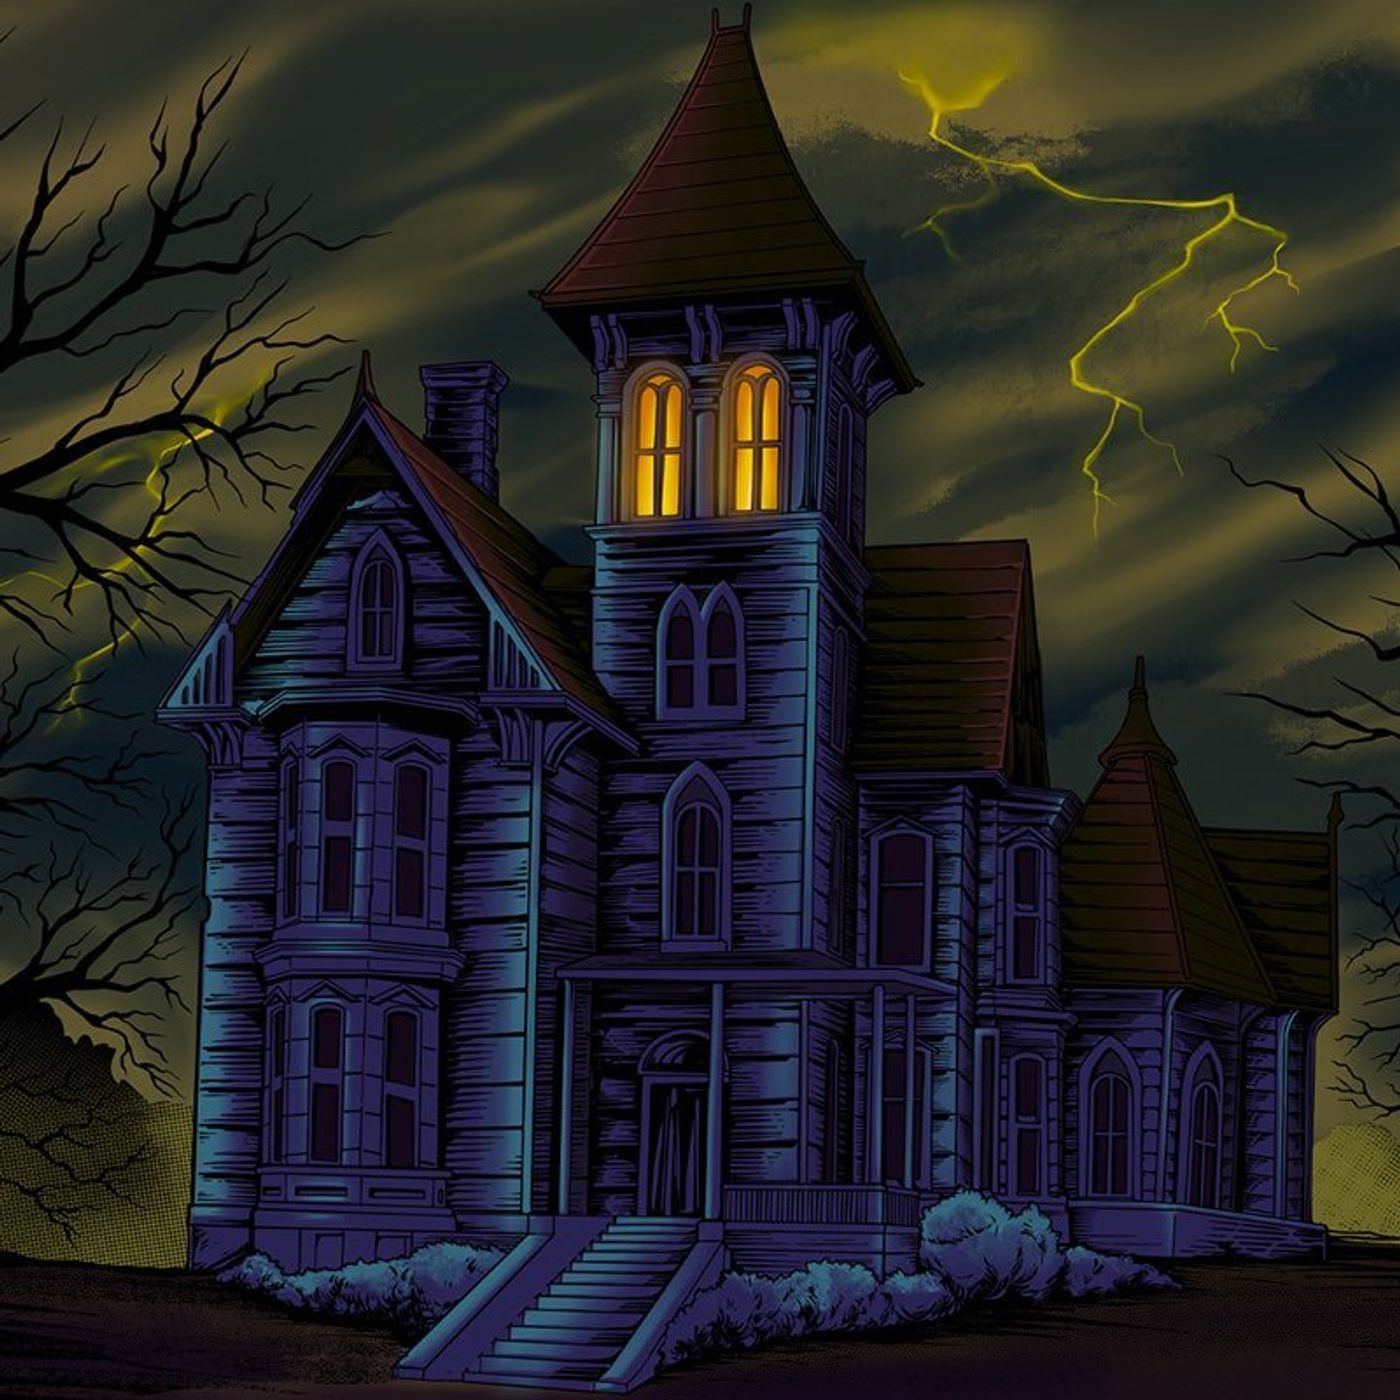 Ep.146 – Murder Mansion 3 of 4 - What Evil Lurks in the Shadows? Image